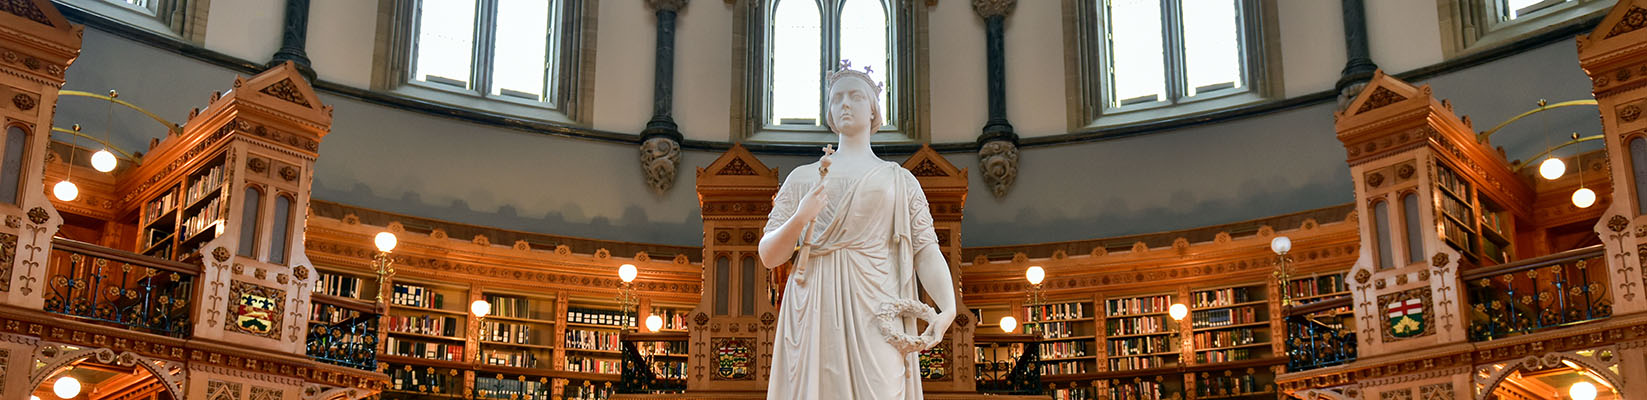 Queen Victoria in the Main Reading Room of the Library of Parliament